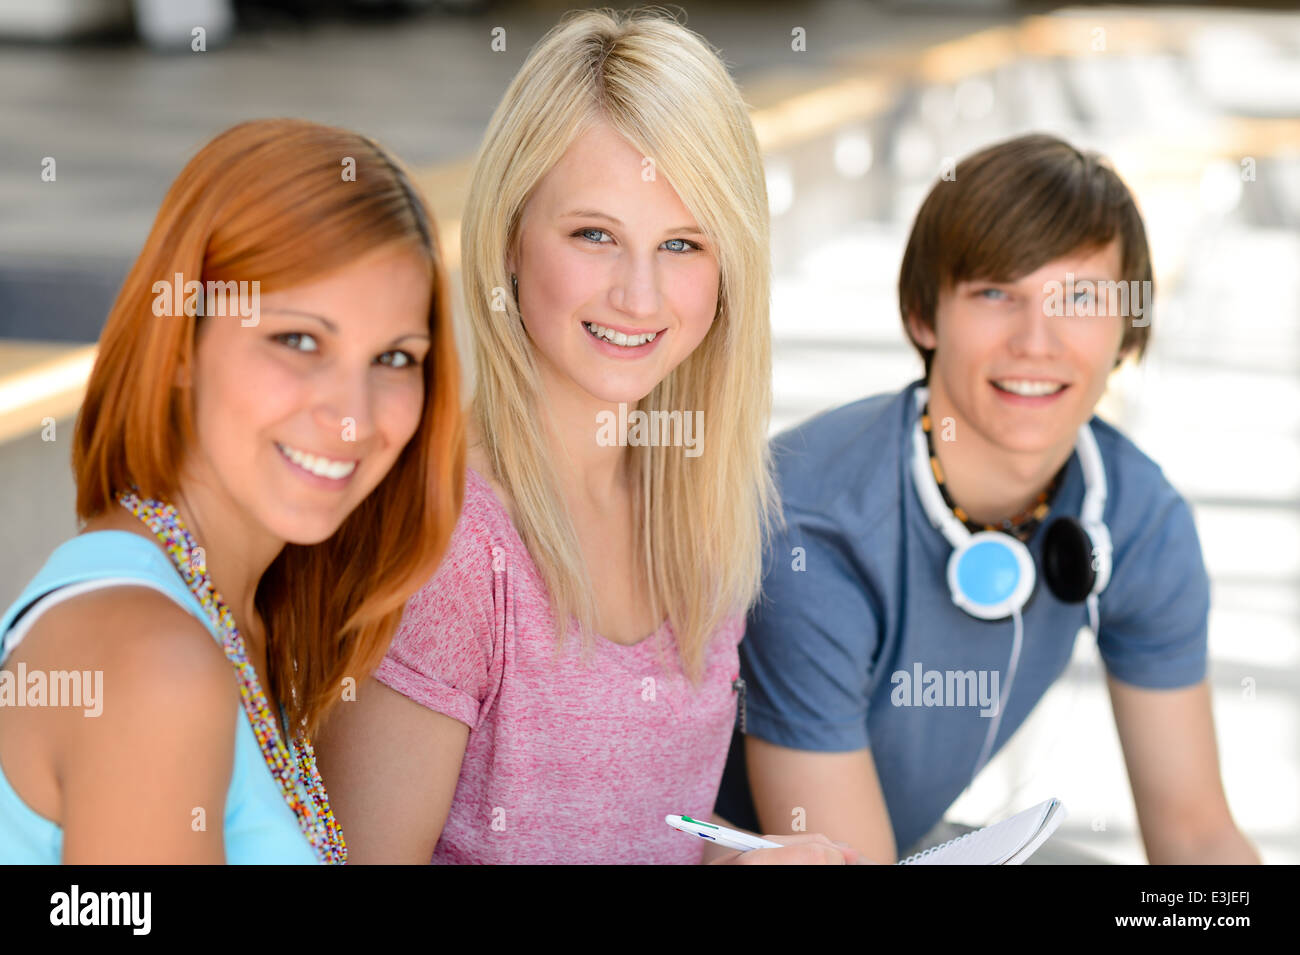 Trois amis smiling college student sitting together looking at camera Banque D'Images